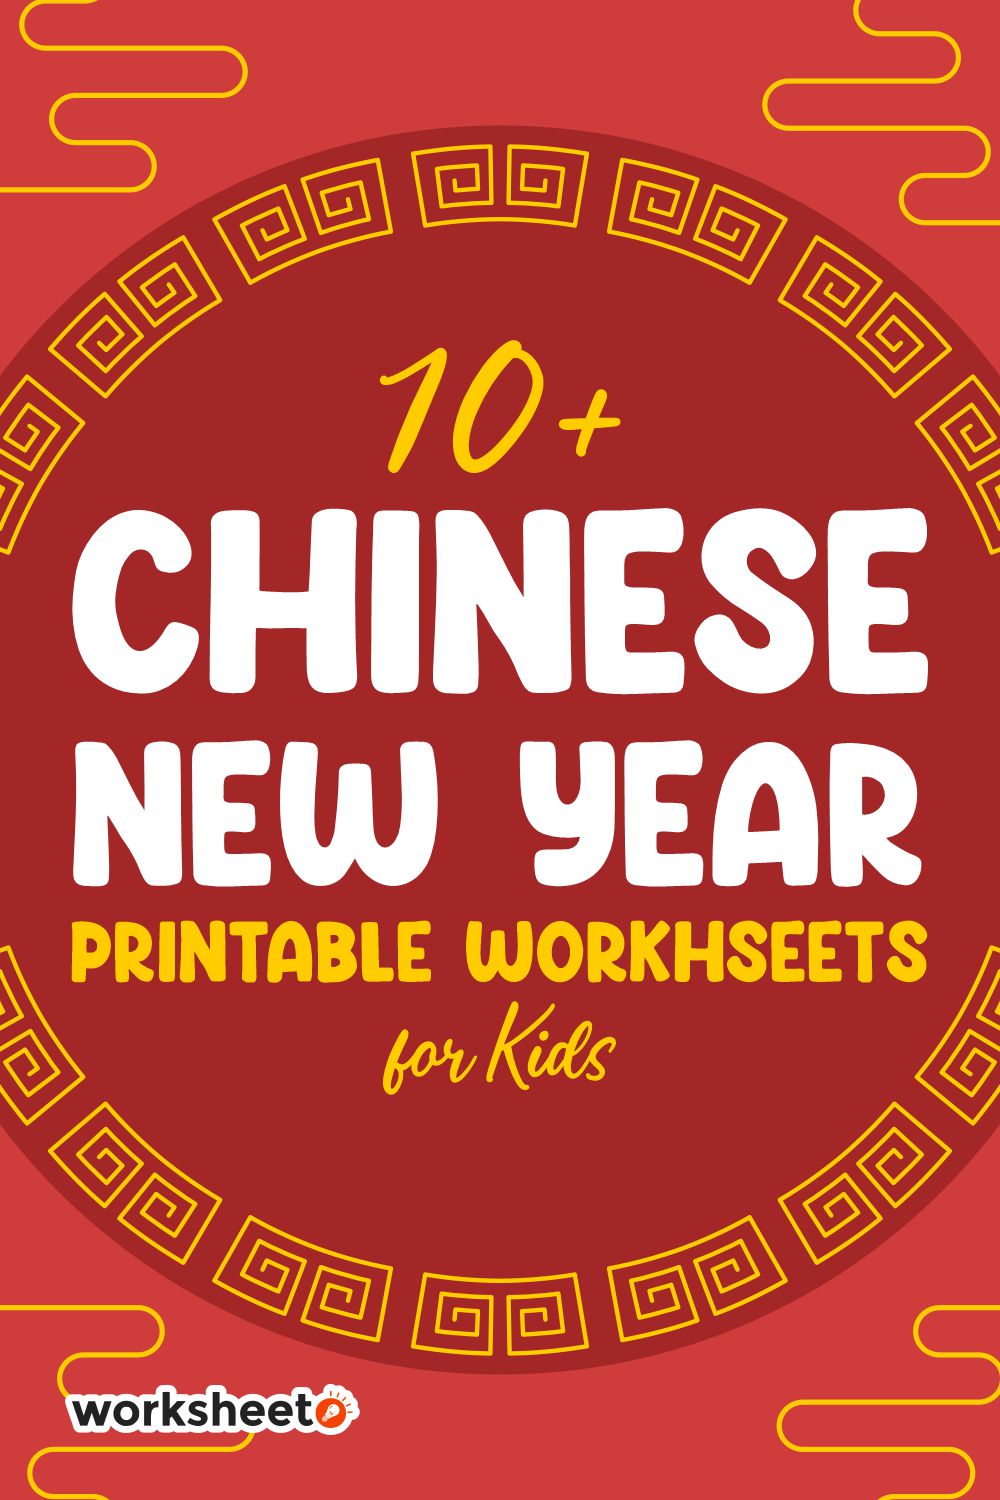 15 Images of Chinese New Year Printable Worksheets For Kids